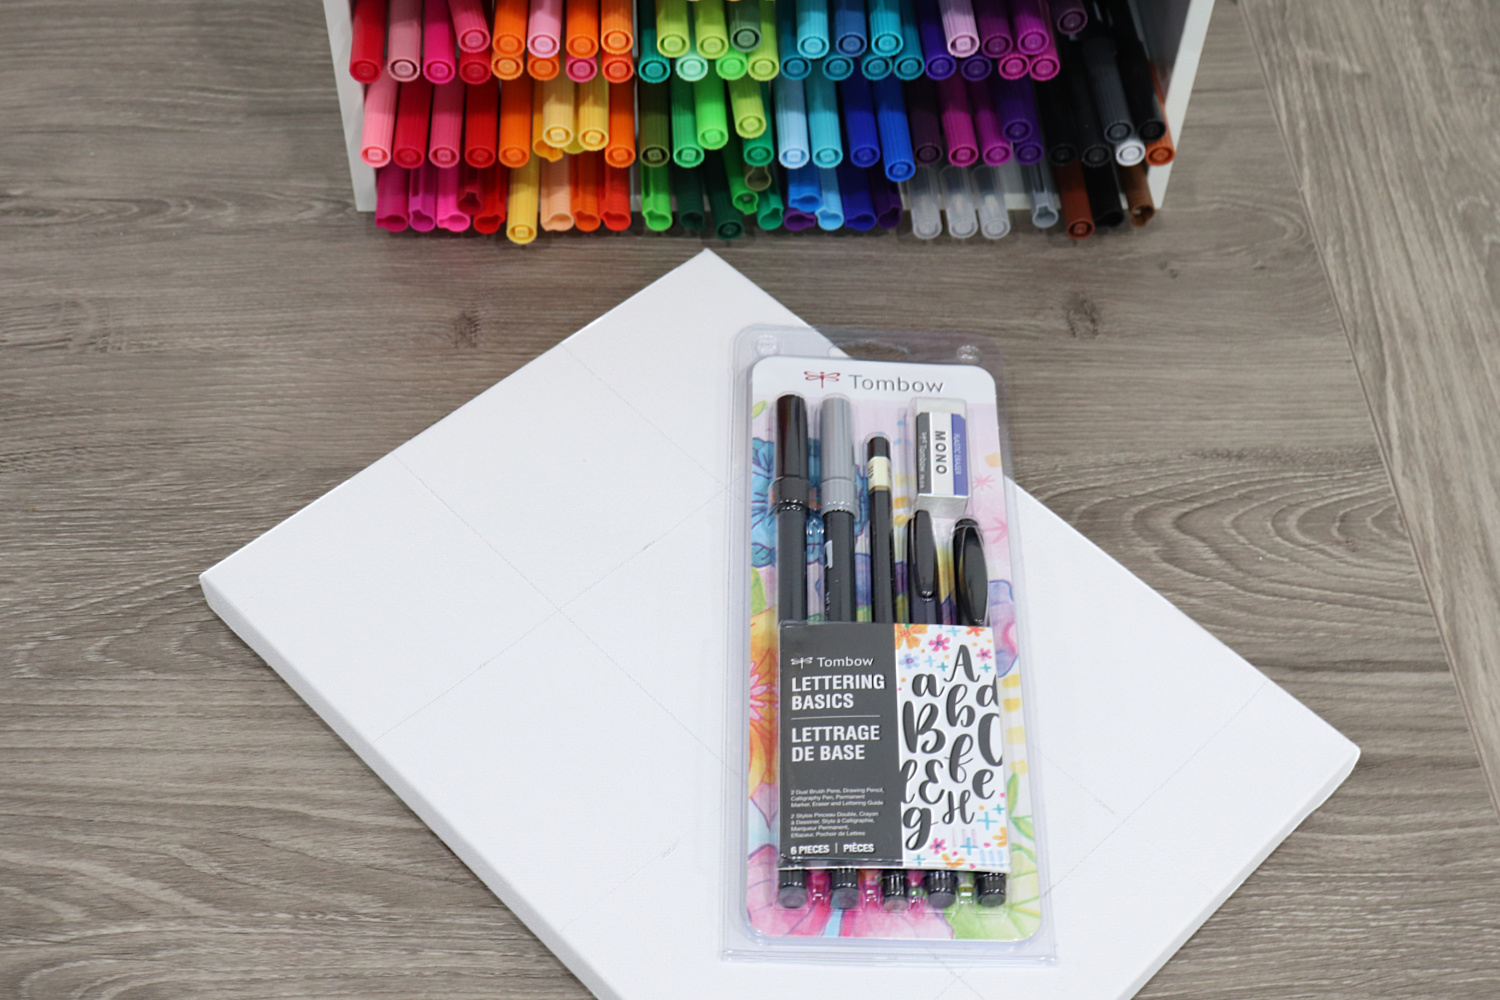 Image contains a blank white canvas sitting on a wooden desk, with the Tombow Lettering Basics Set on top of it. An organizer full of multi-colored markers sits nearby.